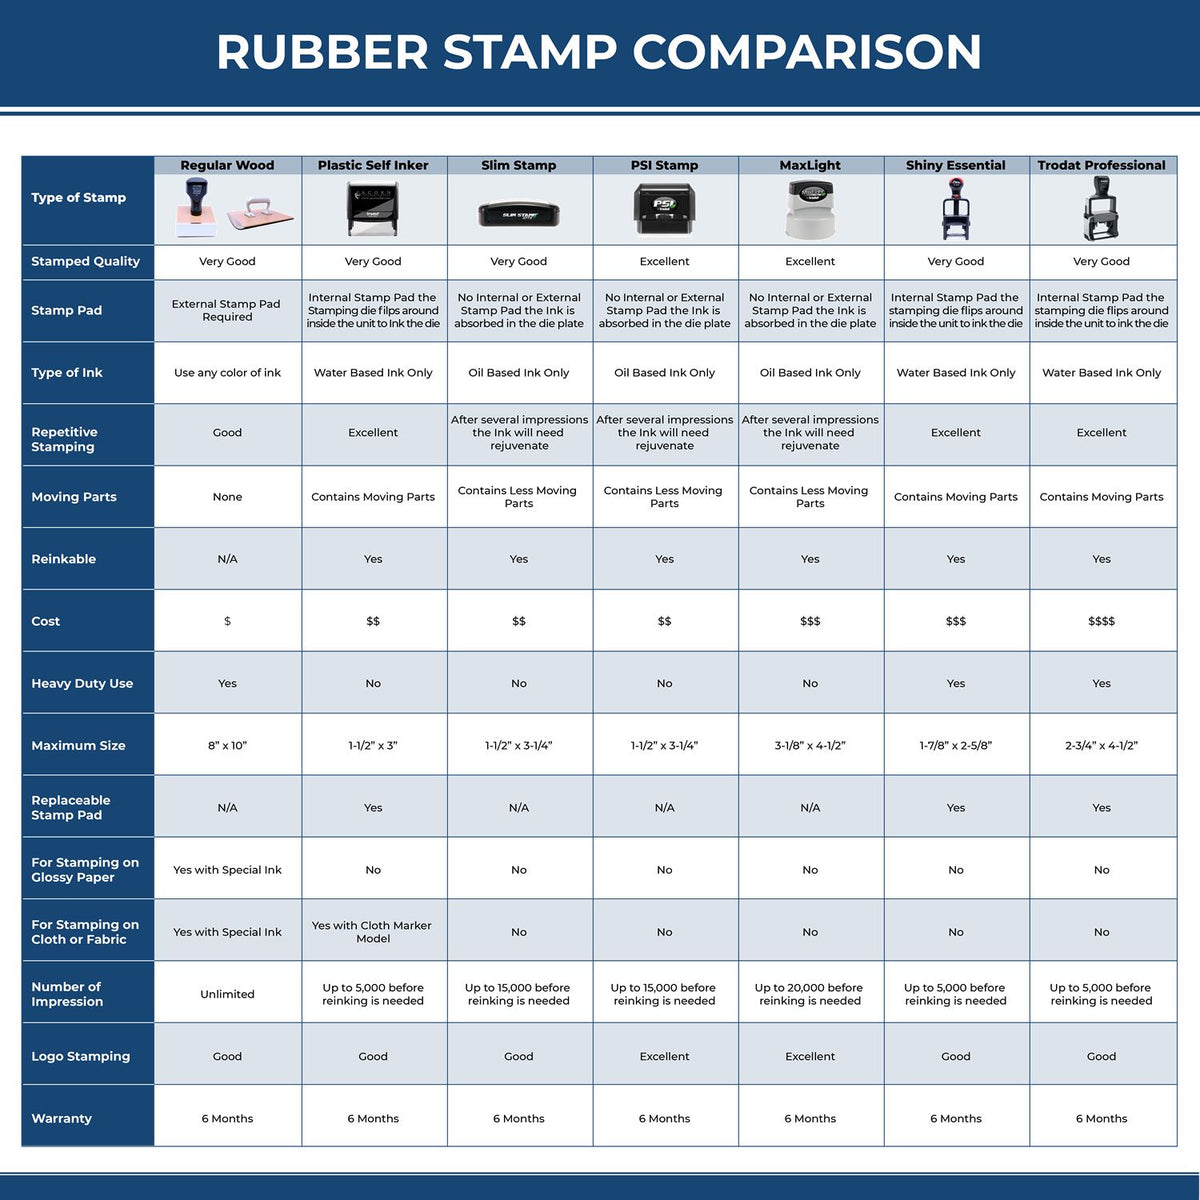 A comparison chart for the different types of mount models available for the Self-Inking Rectangular Puerto Rico Notary Stamp.